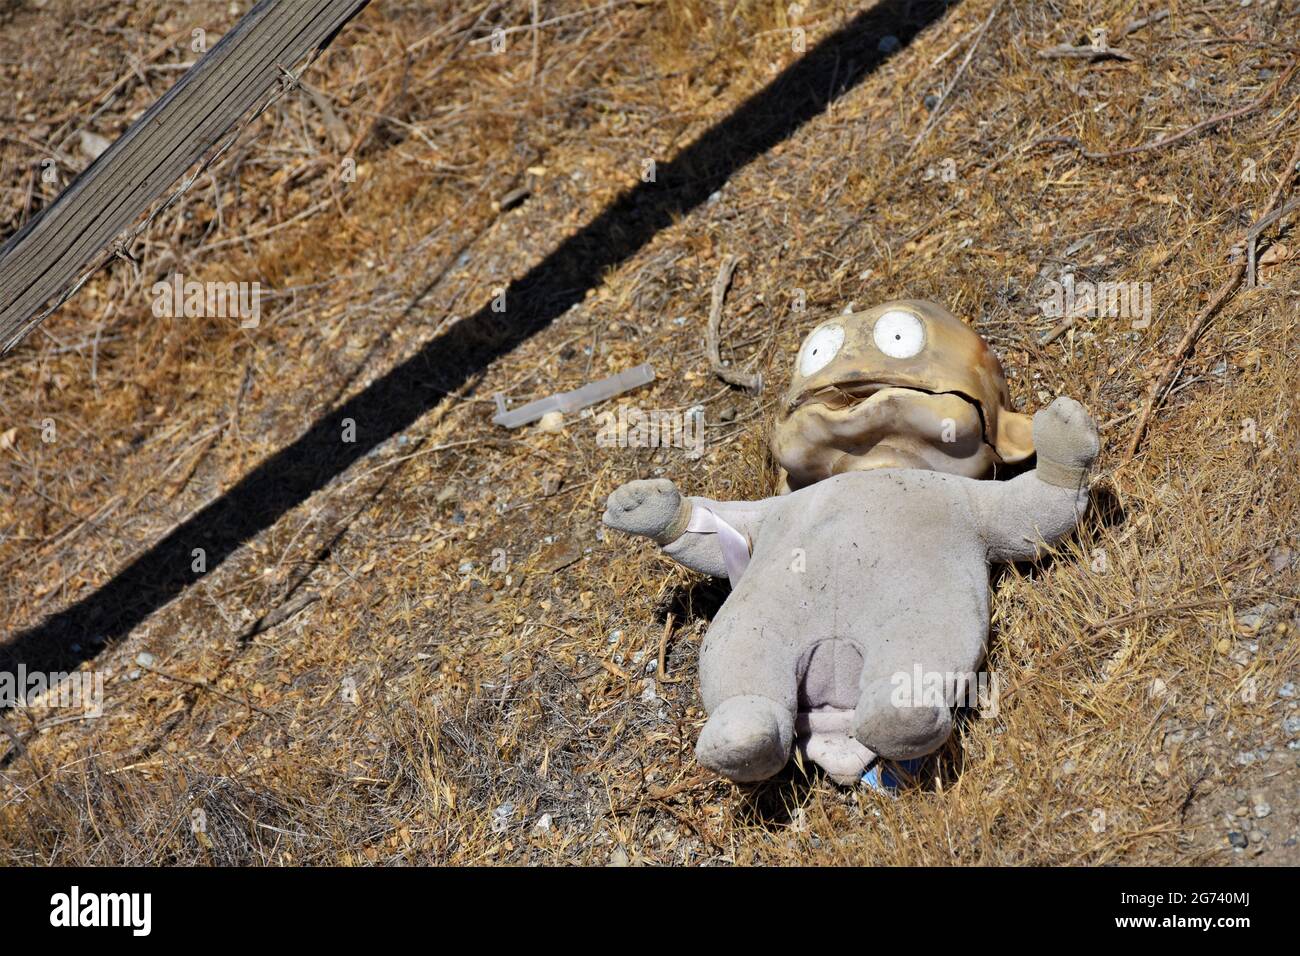 Discarded big eyed doll on the side of a California highway, baking in the drought sun after being lost from a passing car Stock Photo